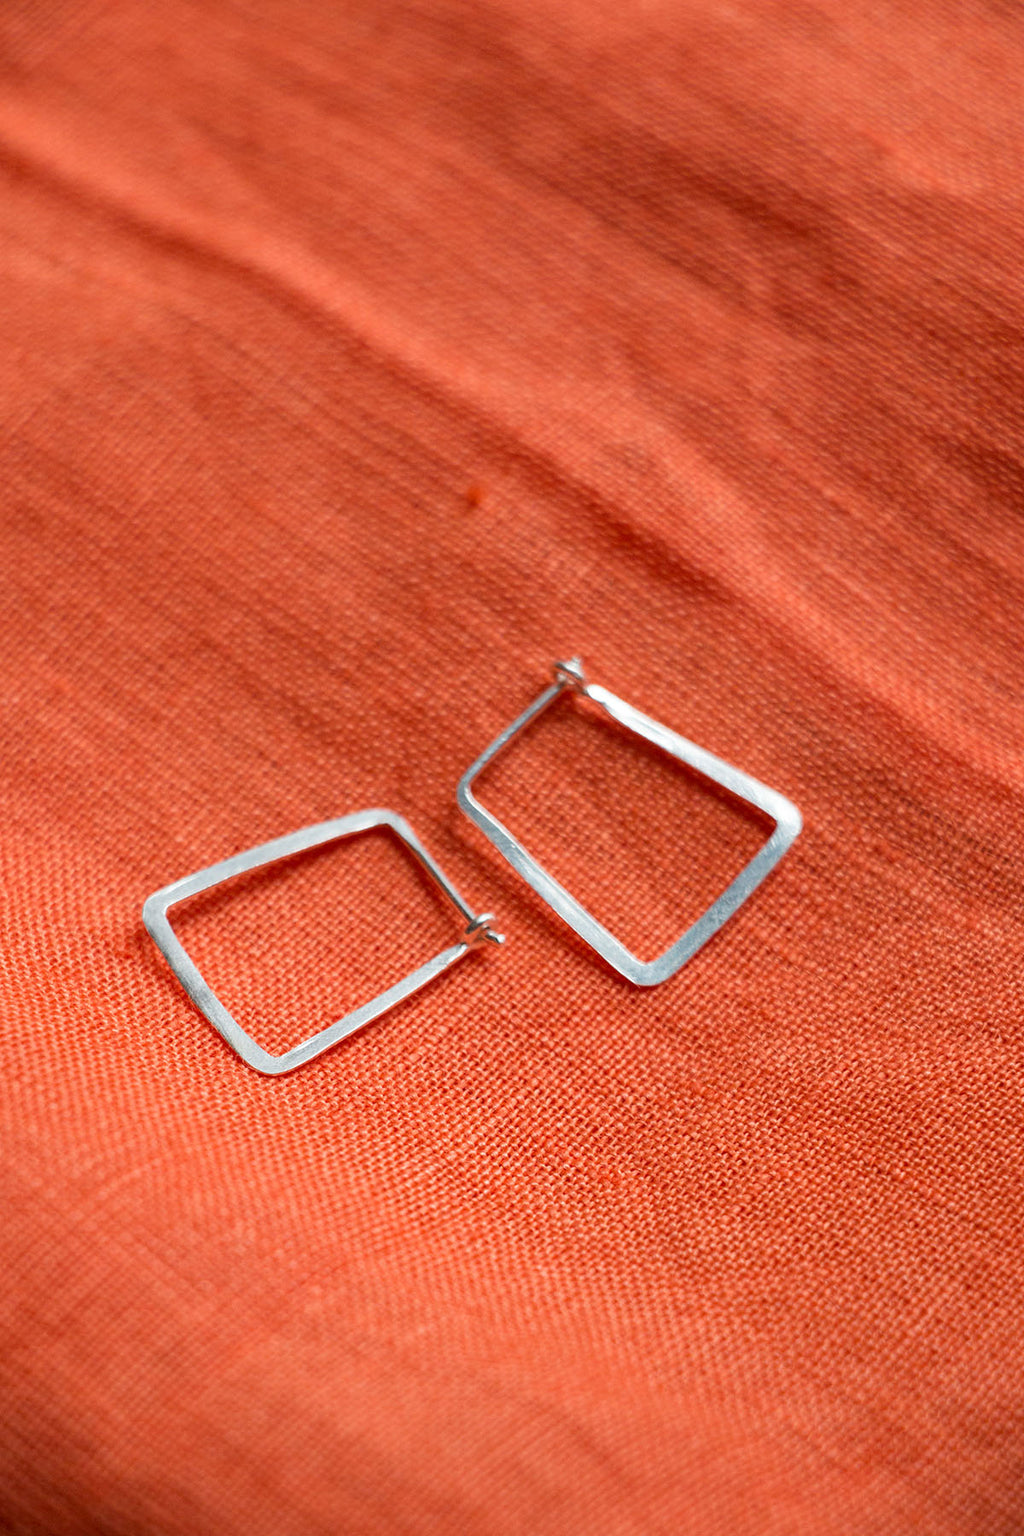 A.M P.M Square Silver Hoops